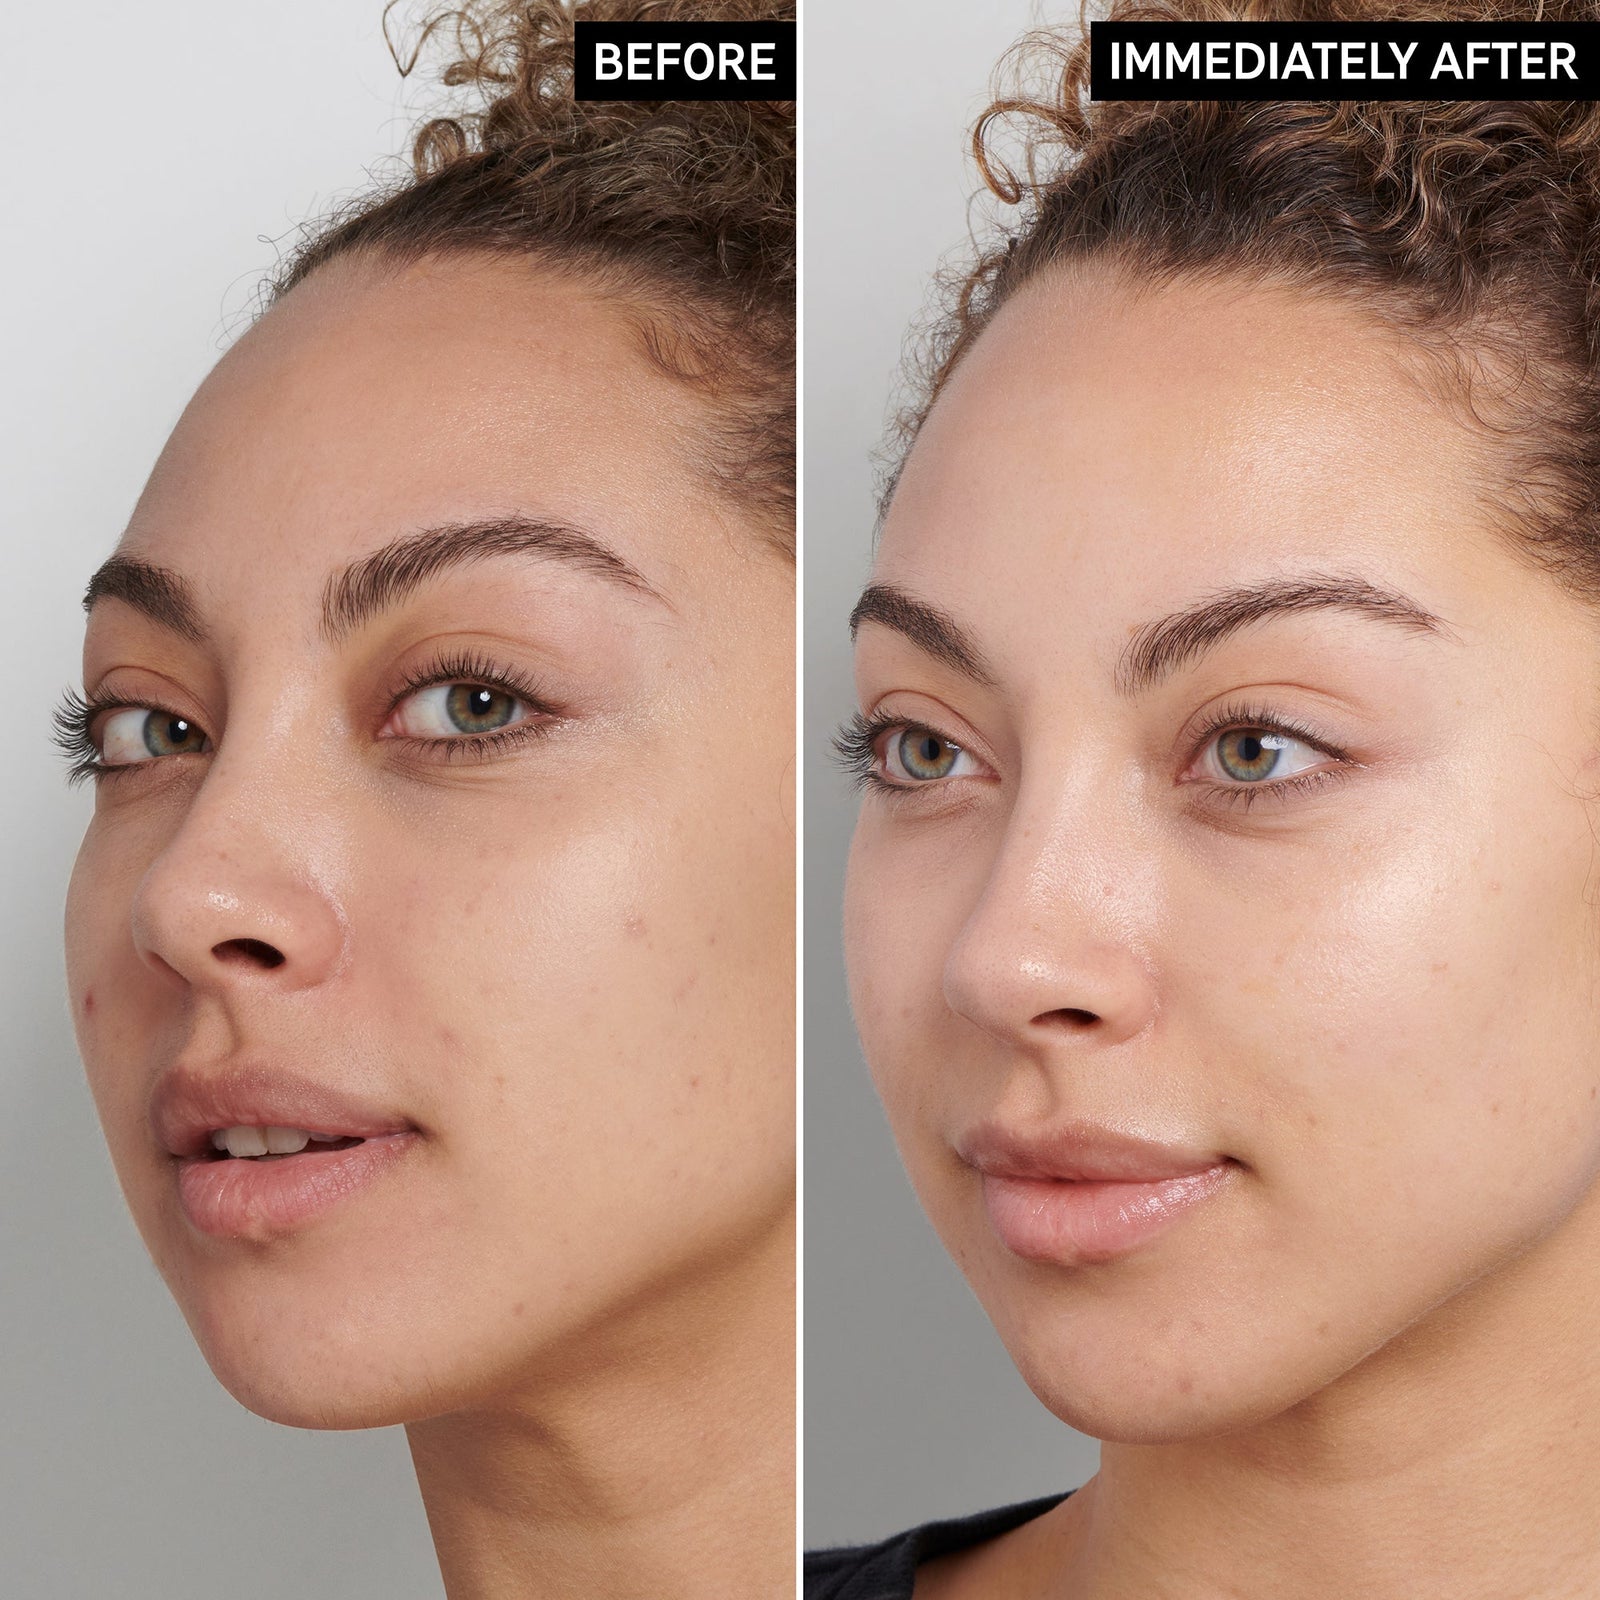 Before and After of model using Fulvic Acid Cleanser